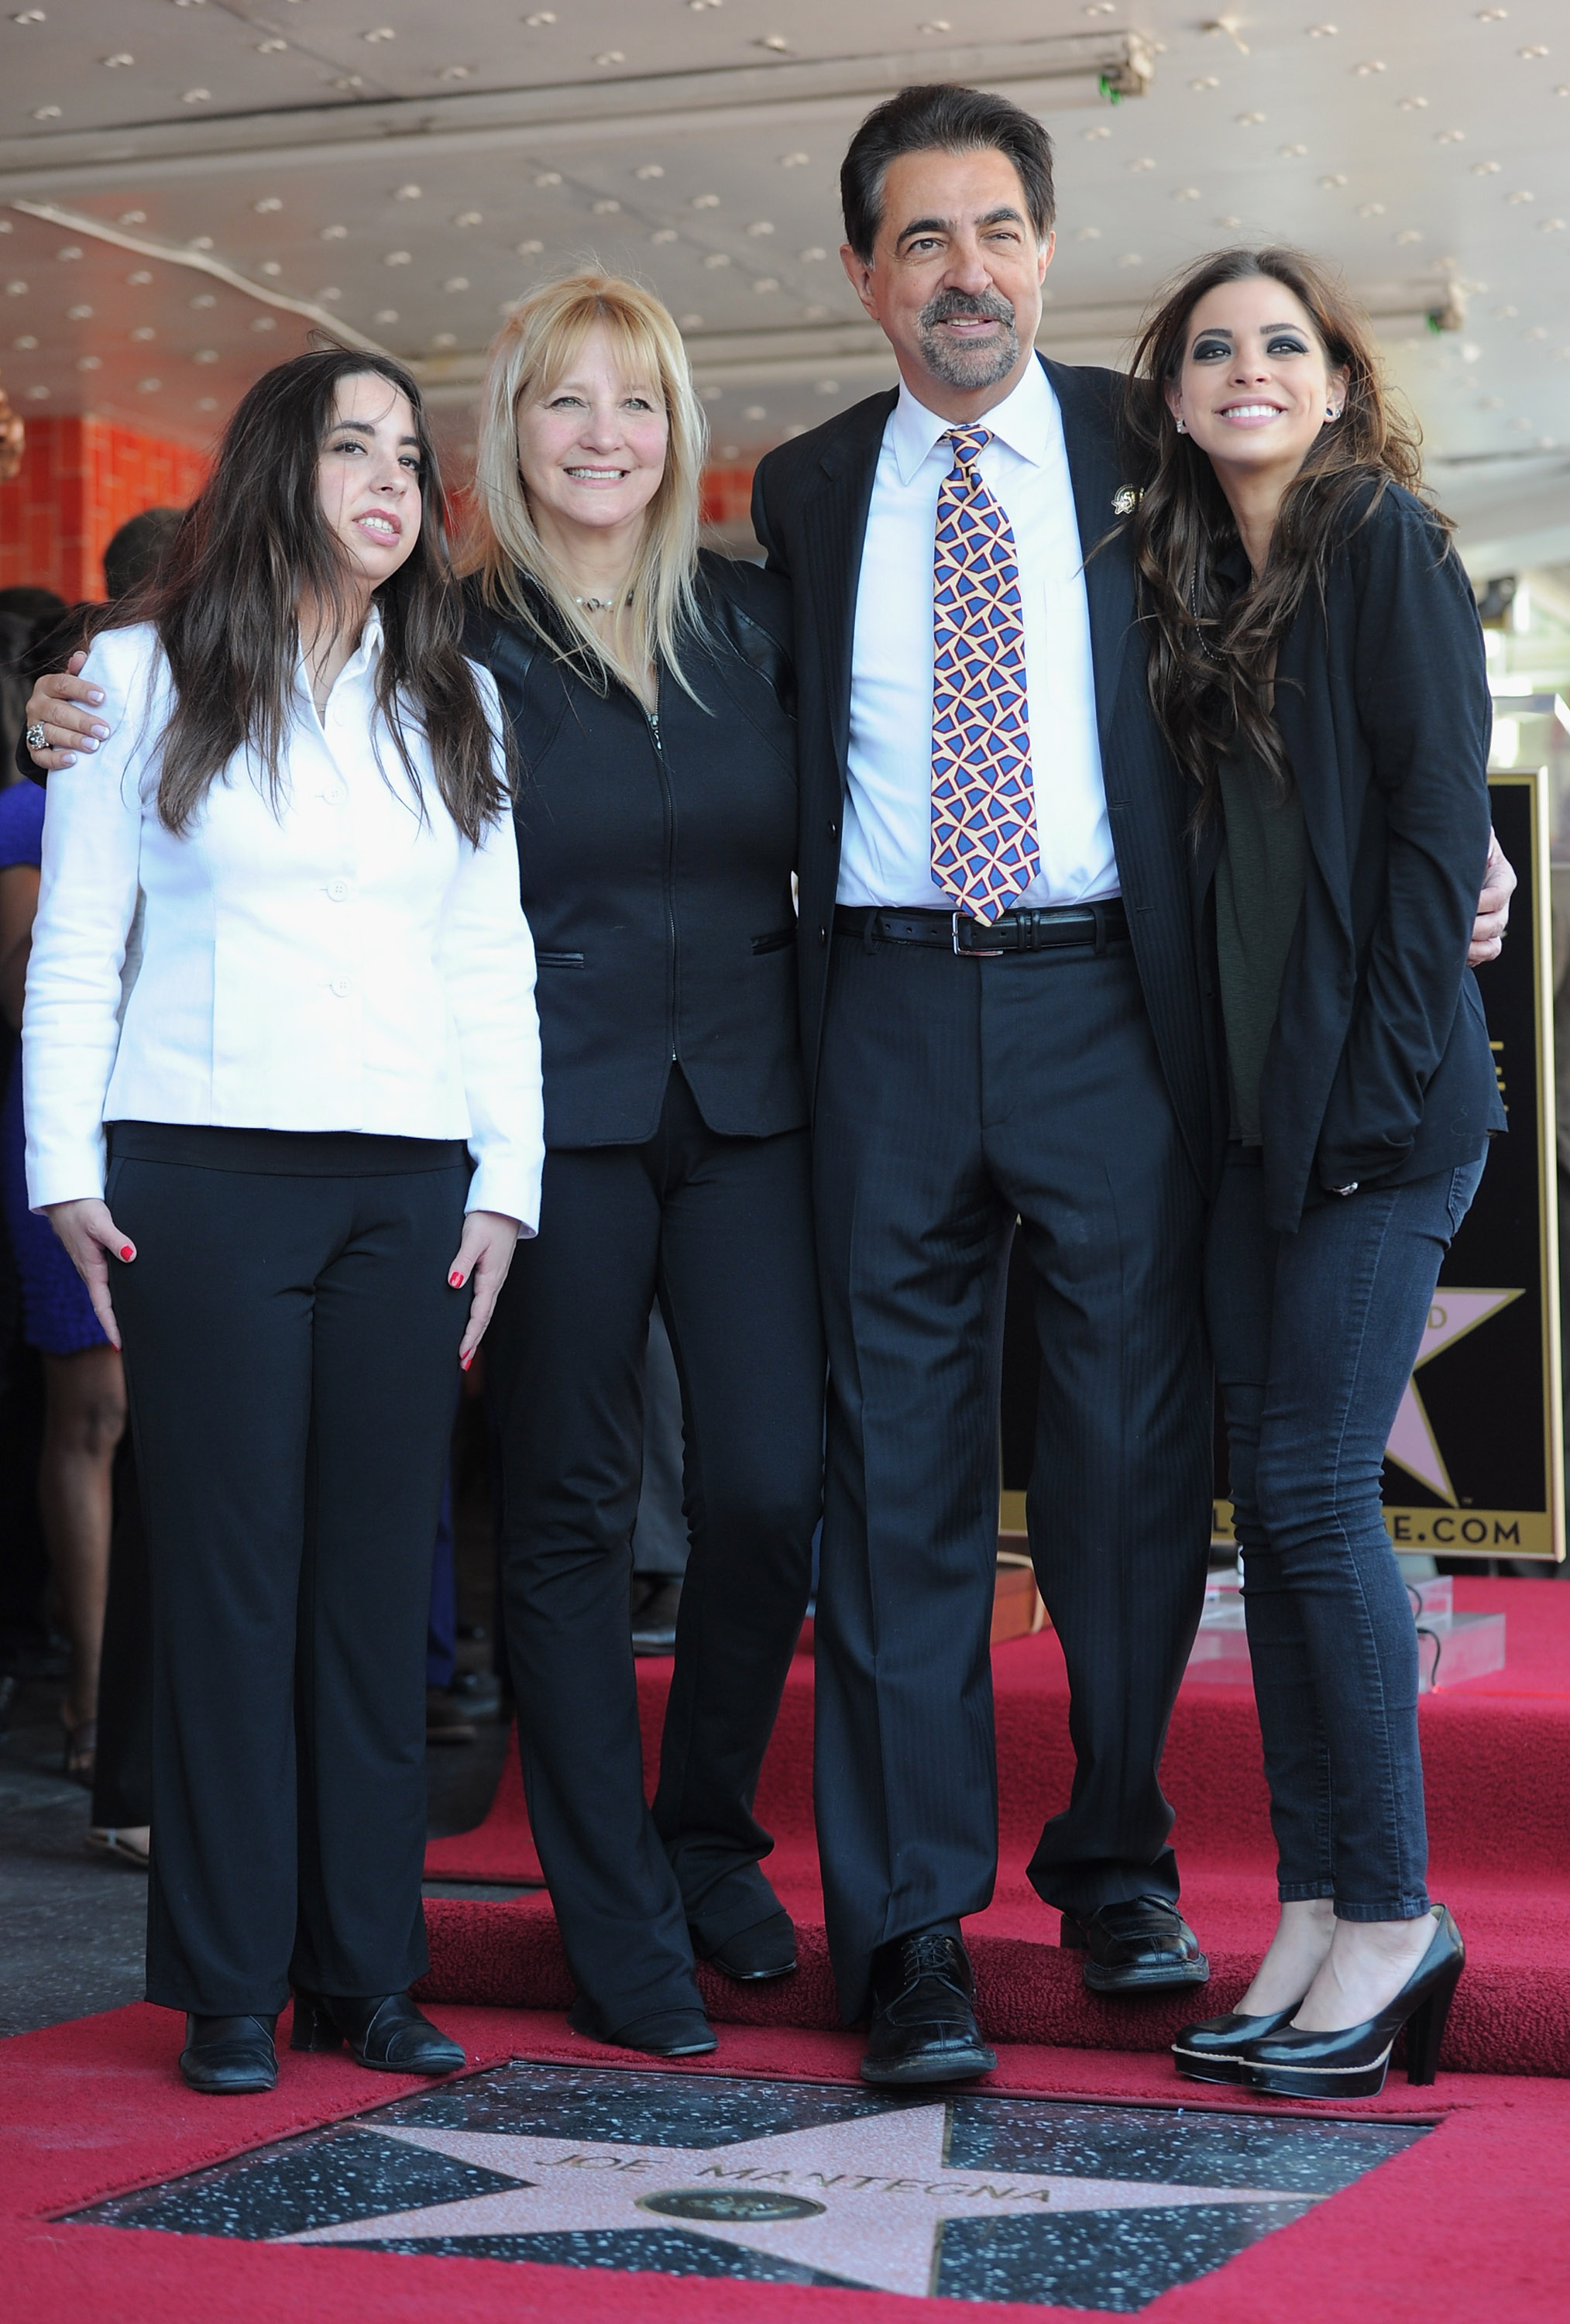 Mia Mantegna, Arlene Vhrel, Joe Mantegna, and Gia Mantegna at Joe Mantegna's Hollywood Walk of Fame star ceremony in Hollywood, California on April 29, 2011 | Source: Getty Images